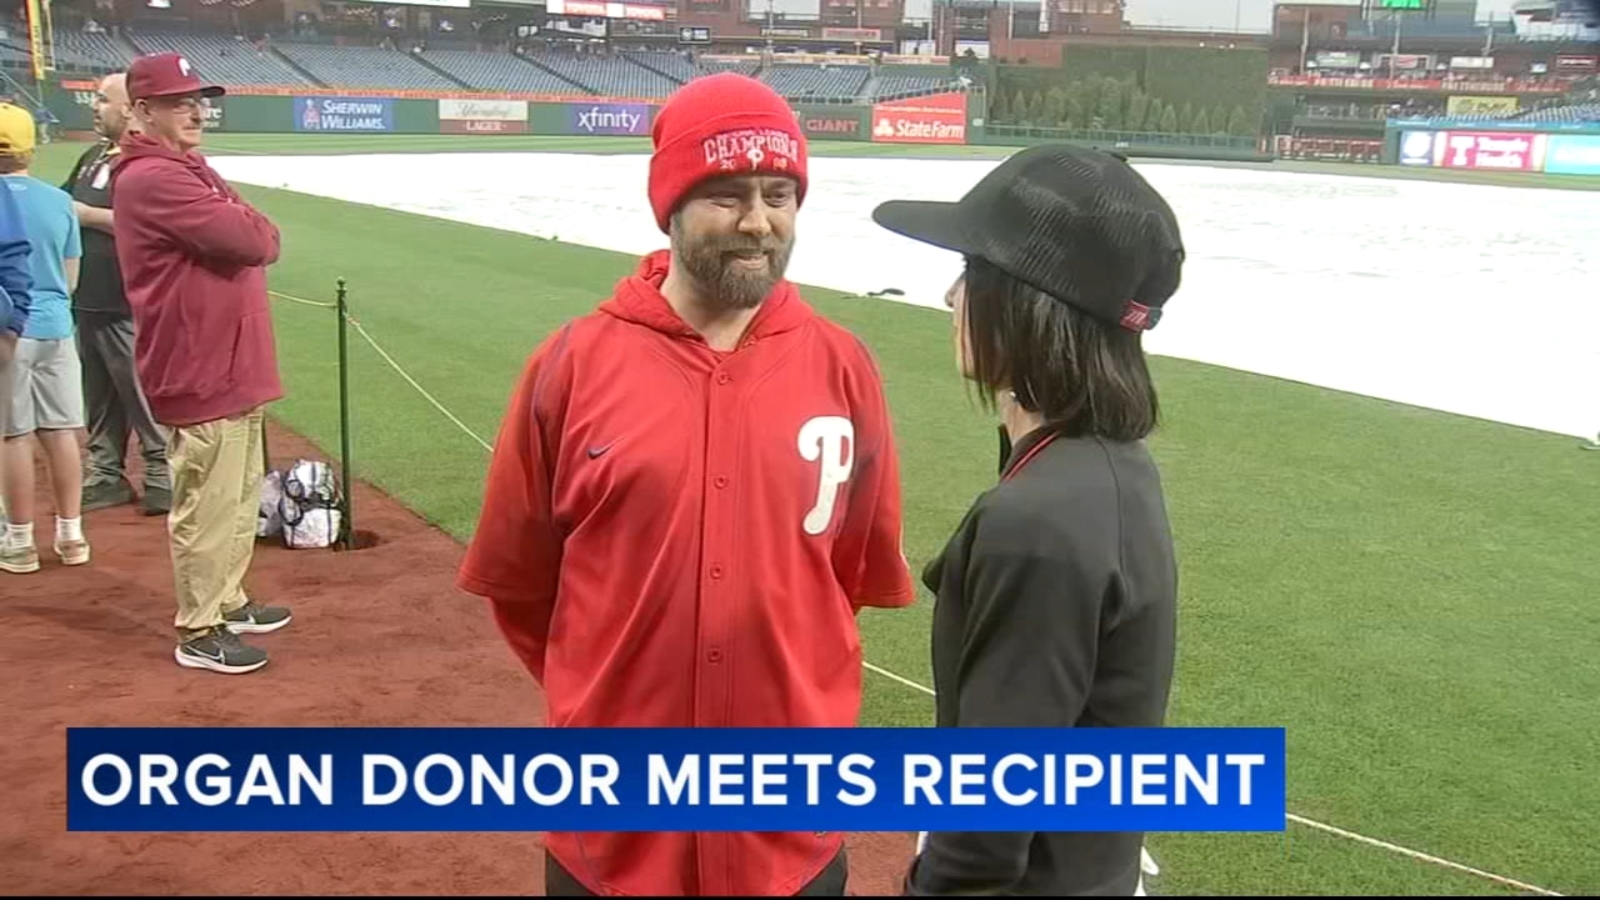 Kidney transplant recipient meets donor for first time at Philadelphia Phillies game at Citizens Bank Park [Video]